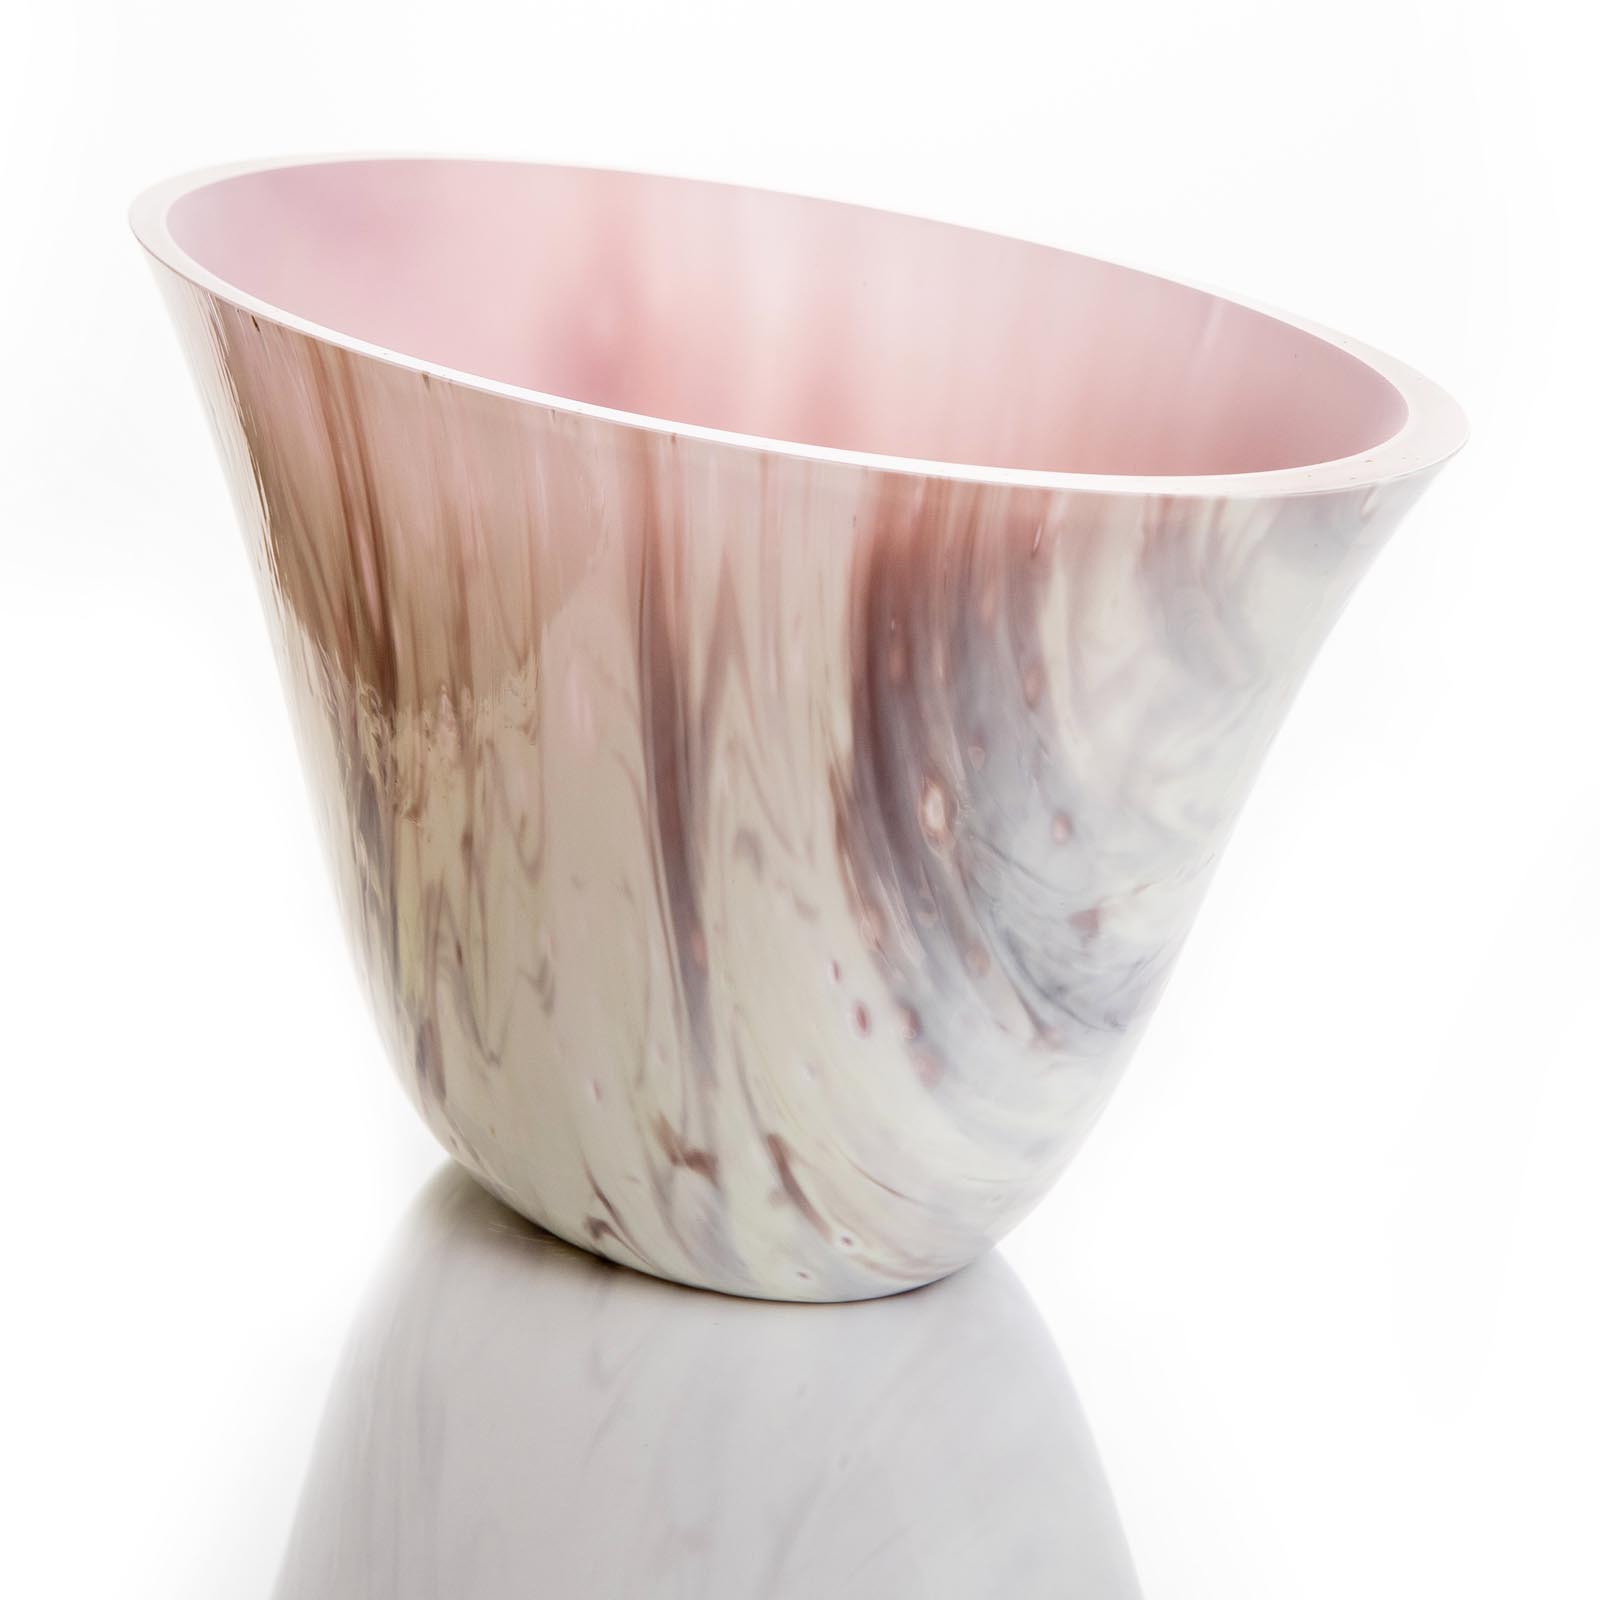 Rosea fluctus streaky white and cranberry pink eclipse glass vessel - contemporary glassware hand made in Ireland by Keith Sheppard Glass Artistry, Northern Ireland